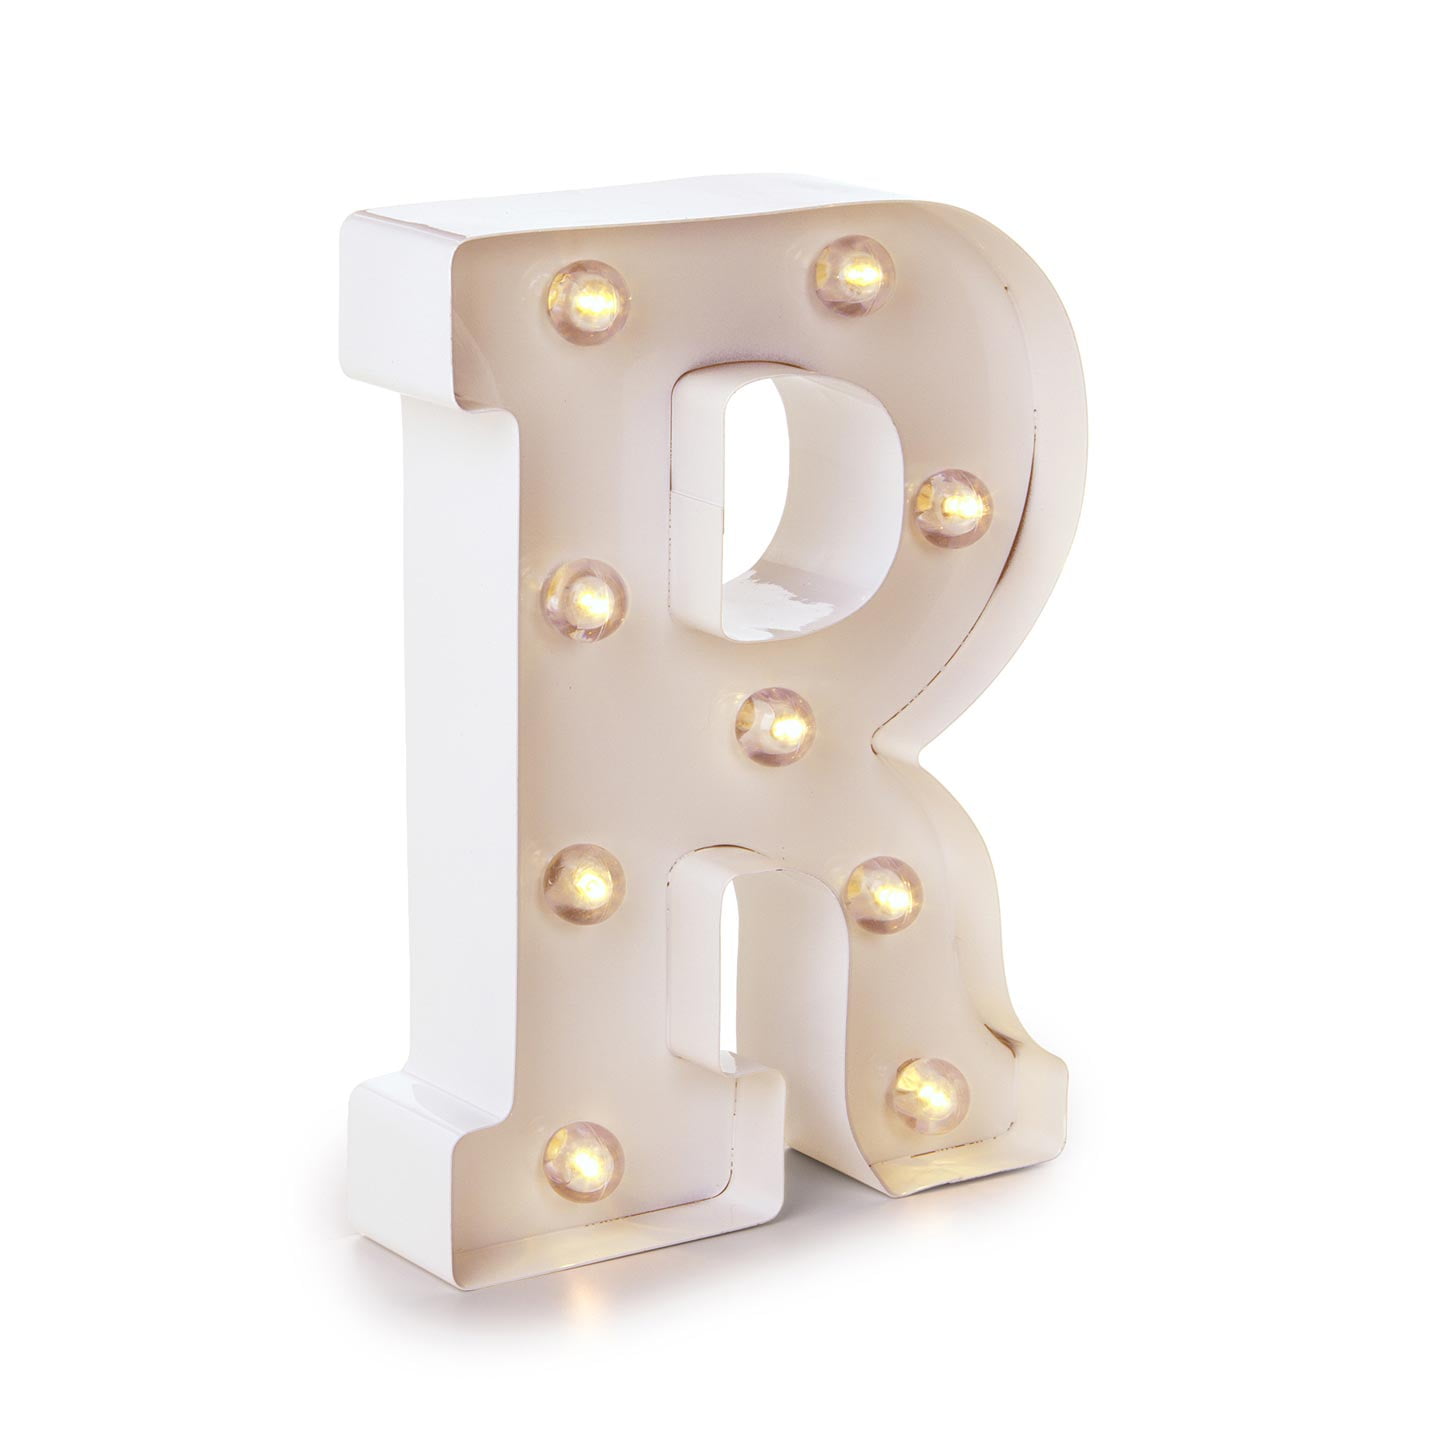 An illuminated Wood Letter R With 9 LED approx 16 inches 